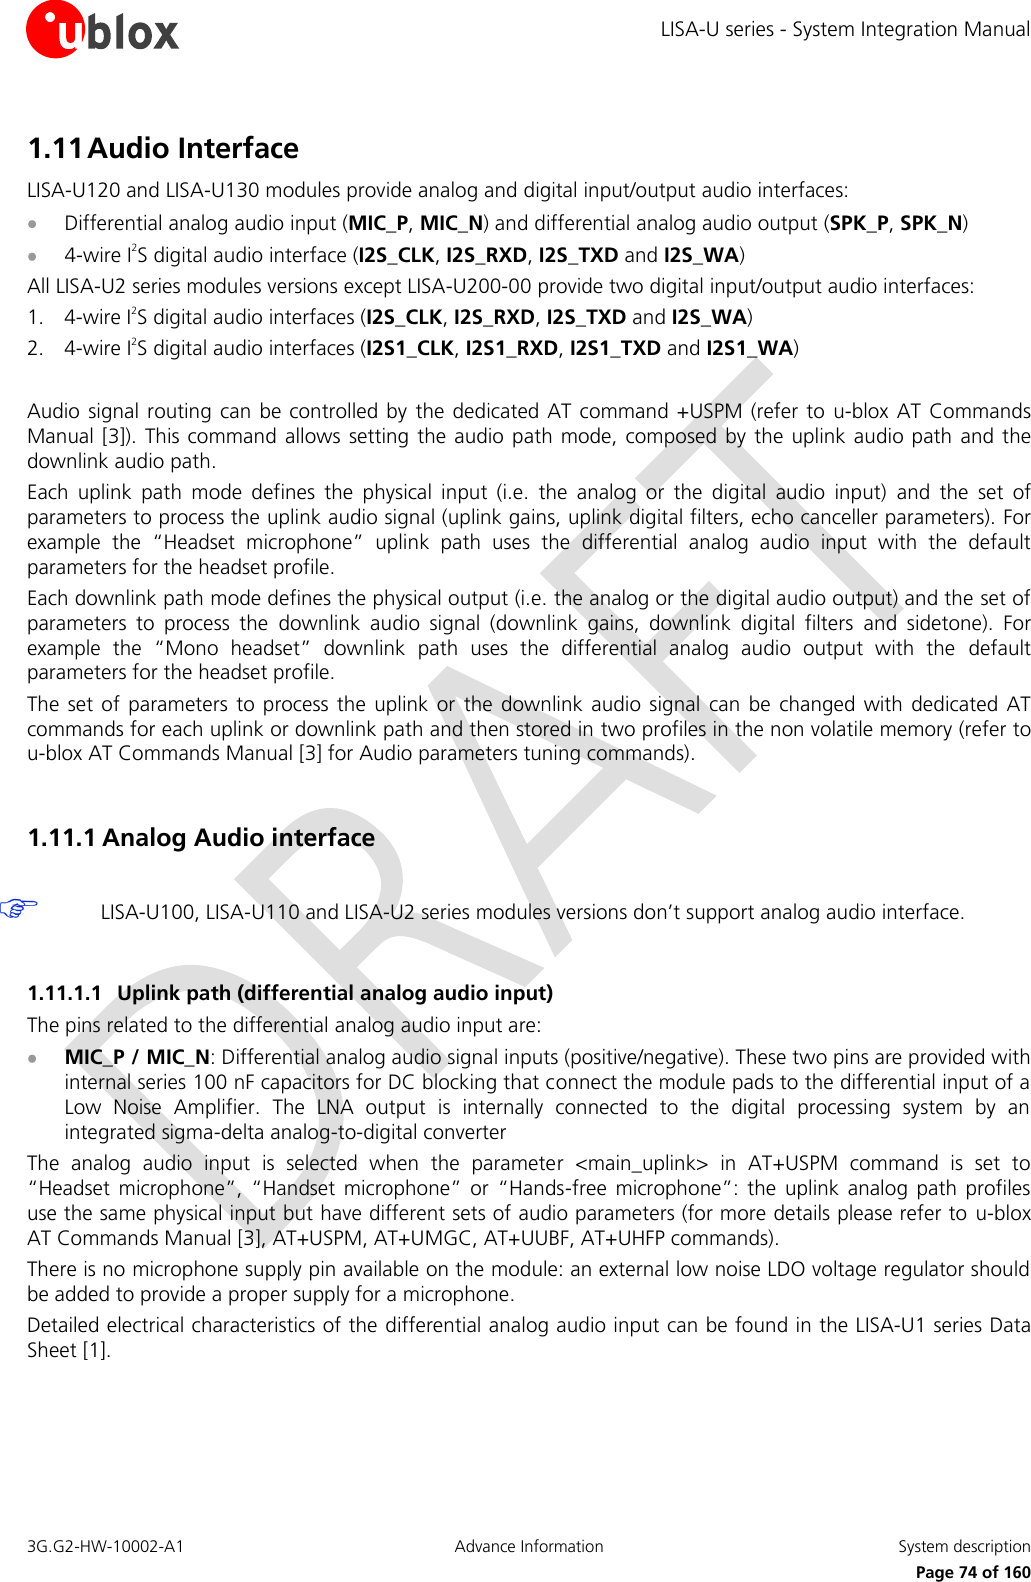 LISA-U series - System Integration Manual 3G.G2-HW-10002-A1  Advance Information  System description      Page 74 of 160 1.11 Audio Interface LISA-U120 and LISA-U130 modules provide analog and digital input/output audio interfaces:  Differential analog audio input (MIC_P, MIC_N) and differential analog audio output (SPK_P, SPK_N)  4-wire I2S digital audio interface (I2S_CLK, I2S_RXD, I2S_TXD and I2S_WA) All LISA-U2 series modules versions except LISA-U200-00 provide two digital input/output audio interfaces: 1. 4-wire I2S digital audio interfaces (I2S_CLK, I2S_RXD, I2S_TXD and I2S_WA) 2. 4-wire I2S digital audio interfaces (I2S1_CLK, I2S1_RXD, I2S1_TXD and I2S1_WA)  Audio signal routing can  be controlled by  the dedicated AT command +USPM (refer to  u-blox AT  Commands Manual [3]). This command allows  setting the audio path mode, composed  by the  uplink  audio path and the downlink audio path. Each  uplink  path  mode  defines  the  physical  input  (i.e.  the  analog  or  the  digital  audio  input)  and  the  set  of parameters to process the uplink audio signal (uplink gains, uplink digital filters, echo canceller parameters). For example  the  “Headset  microphone”  uplink  path  uses  the  differential  analog  audio  input  with  the  default parameters for the headset profile. Each downlink path mode defines the physical output (i.e. the analog or the digital audio output) and the set of parameters  to  process  the  downlink  audio  signal  (downlink  gains,  downlink  digital  filters  and  sidetone).  For example  the  “Mono  headset”  downlink  path  uses  the  differential  analog  audio  output  with  the  default parameters for the headset profile. The  set of parameters  to process  the  uplink or  the downlink audio  signal  can  be changed  with dedicated  AT commands for each uplink or downlink path and then stored in two profiles in the non volatile memory (refer to u-blox AT Commands Manual [3] for Audio parameters tuning commands).  1.11.1 Analog Audio interface   LISA-U100, LISA-U110 and LISA-U2 series modules versions don’t support analog audio interface.  1.11.1.1 Uplink path (differential analog audio input) The pins related to the differential analog audio input are:  MIC_P / MIC_N: Differential analog audio signal inputs (positive/negative). These two pins are provided with internal series 100 nF capacitors for DC blocking that connect the module pads to the differential input of a Low  Noise  Amplifier.  The  LNA  output  is  internally  connected  to  the  digital  processing  system  by  an integrated sigma-delta analog-to-digital converter The  analog  audio  input  is  selected  when  the  parameter  &lt;main_uplink&gt;  in  AT+USPM  command  is  set  to “Headset  microphone”,  “Handset  microphone”  or  “Hands-free  microphone”:  the  uplink analog  path  profiles use the same physical input but have different sets of audio parameters (for more details please refer to u-blox AT Commands Manual [3], AT+USPM, AT+UMGC, AT+UUBF, AT+UHFP commands). There is no microphone supply pin available on the module: an external low noise LDO voltage regulator should be added to provide a proper supply for a microphone. Detailed electrical characteristics of the differential analog audio input can be found in the LISA-U1 series Data Sheet [1].  